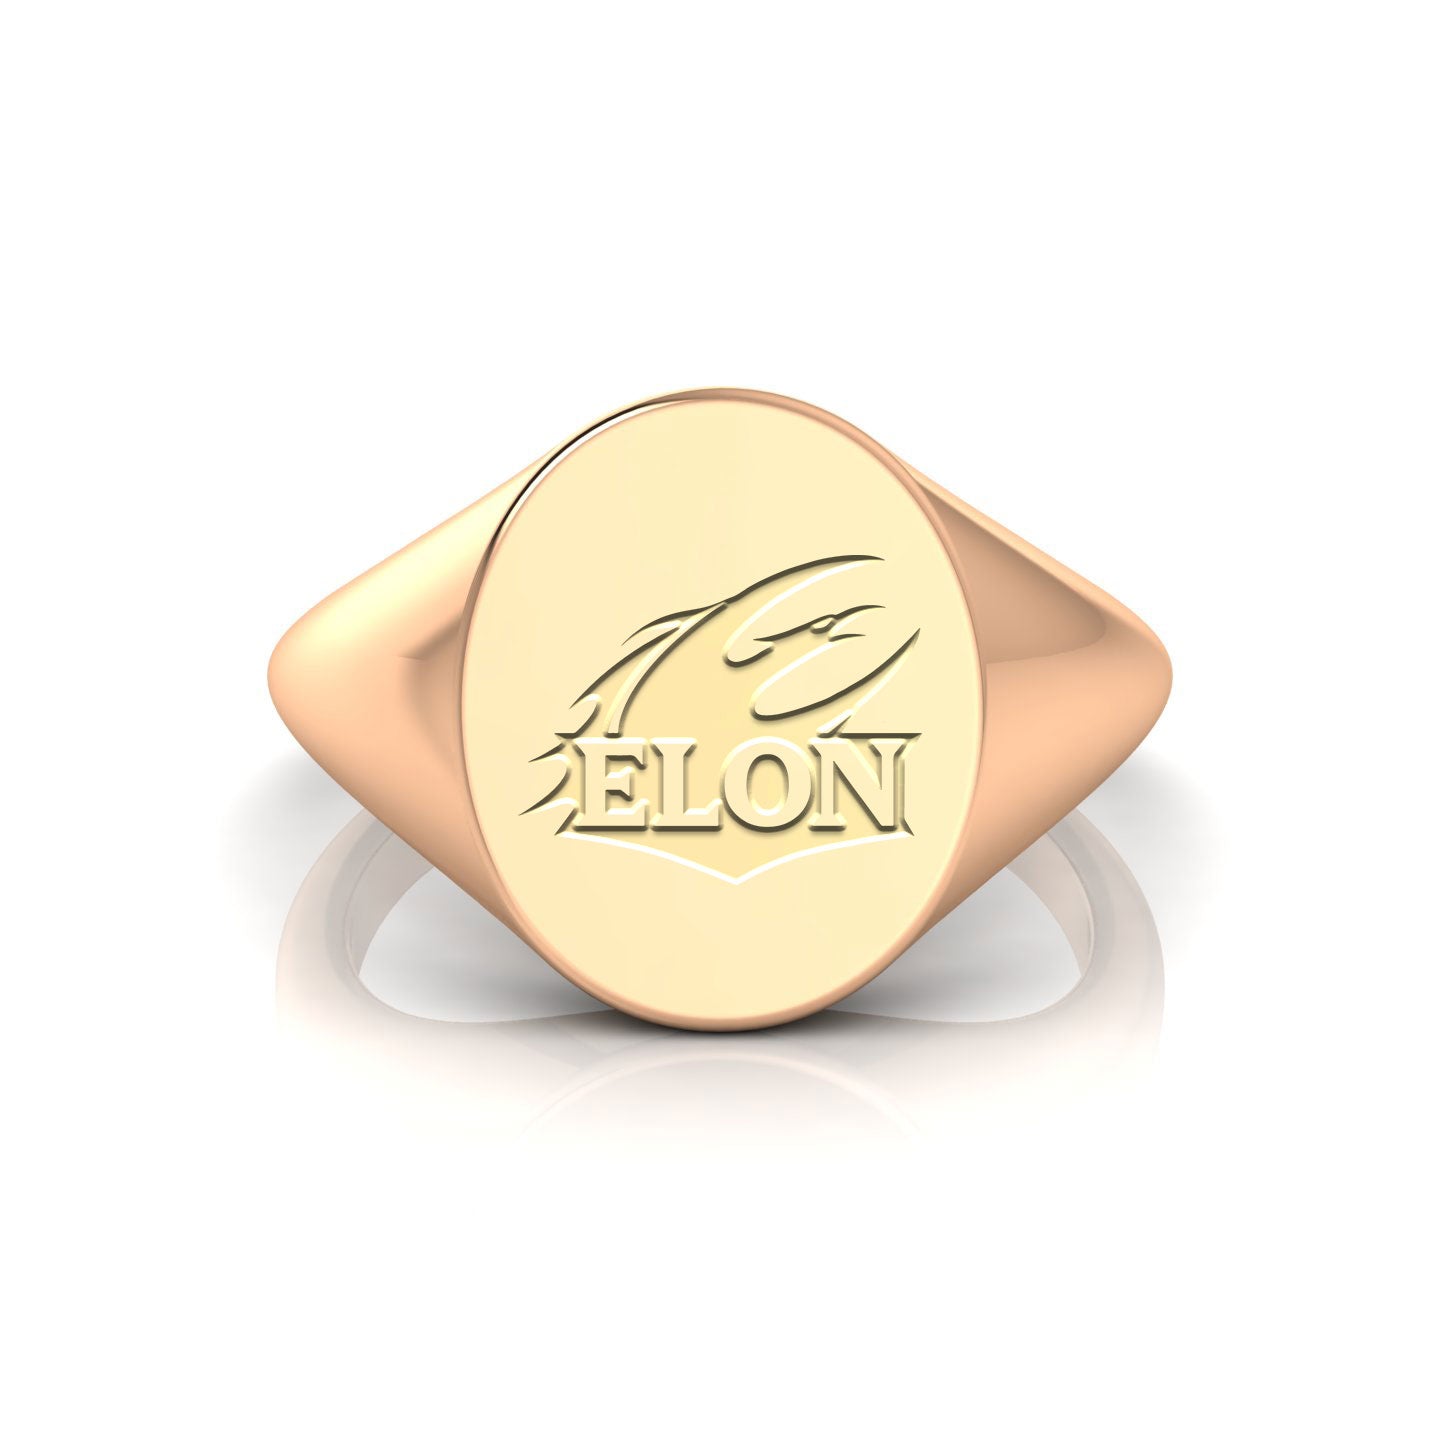 A close-up of an Elon University Oval Heritage Class Ring in 14kt yellow gold. The class ring is oval-shaped with Elon University's signature logo. The logo is engraved in the center of the ring and is surrounded by the university's name and logo. The class ring is made of high-quality 14kt yellow gold and has a comfortable fit.